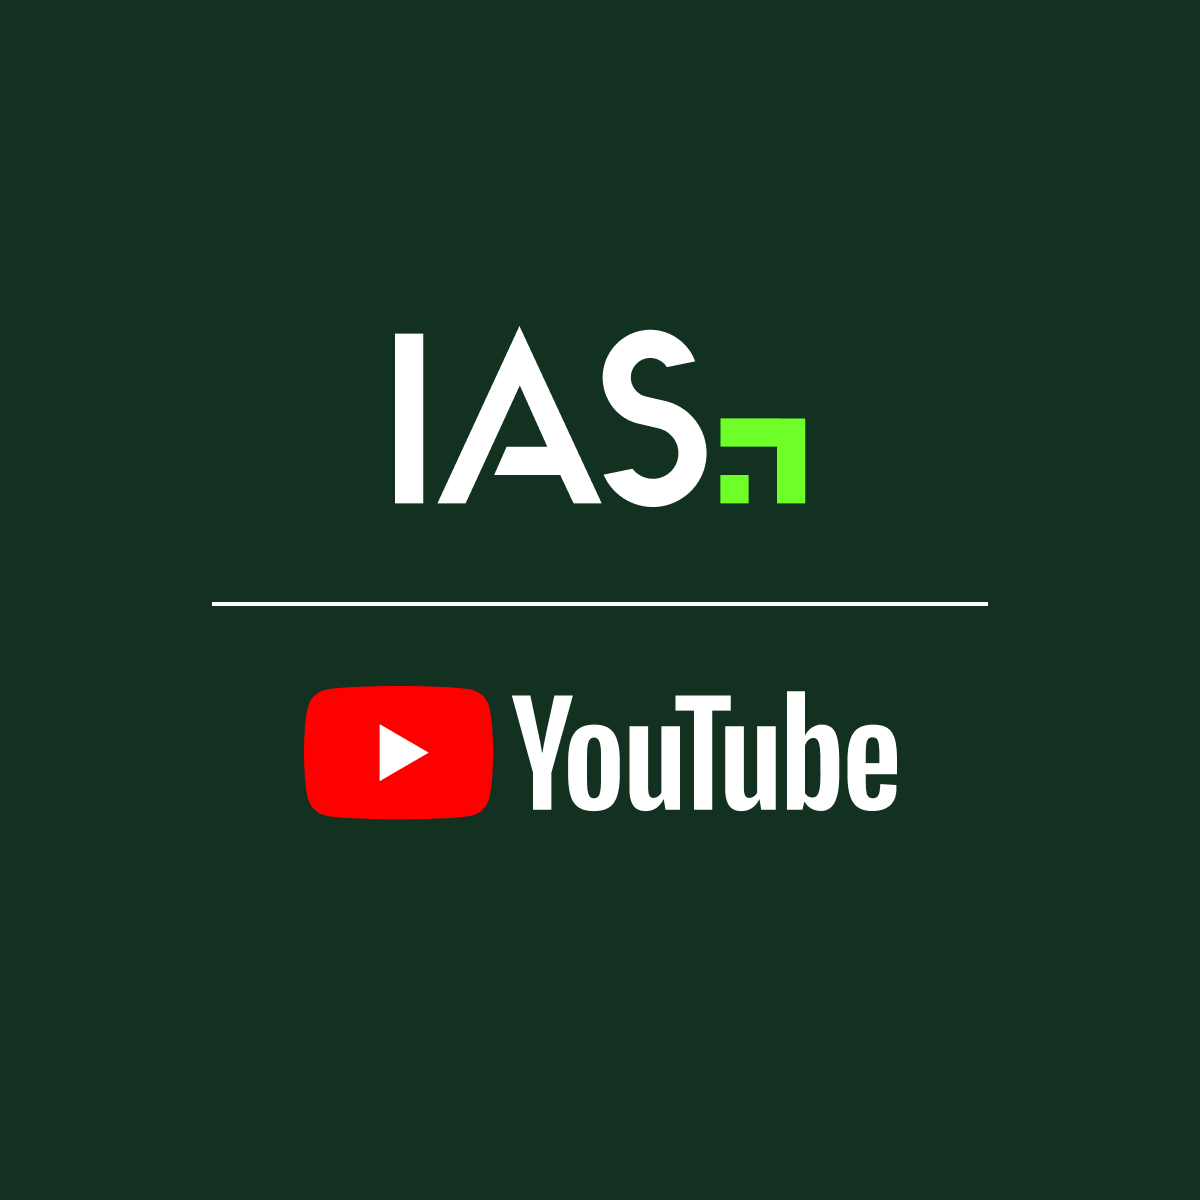 IAS expands total media quality for youtube shorts brand safety and suitability.